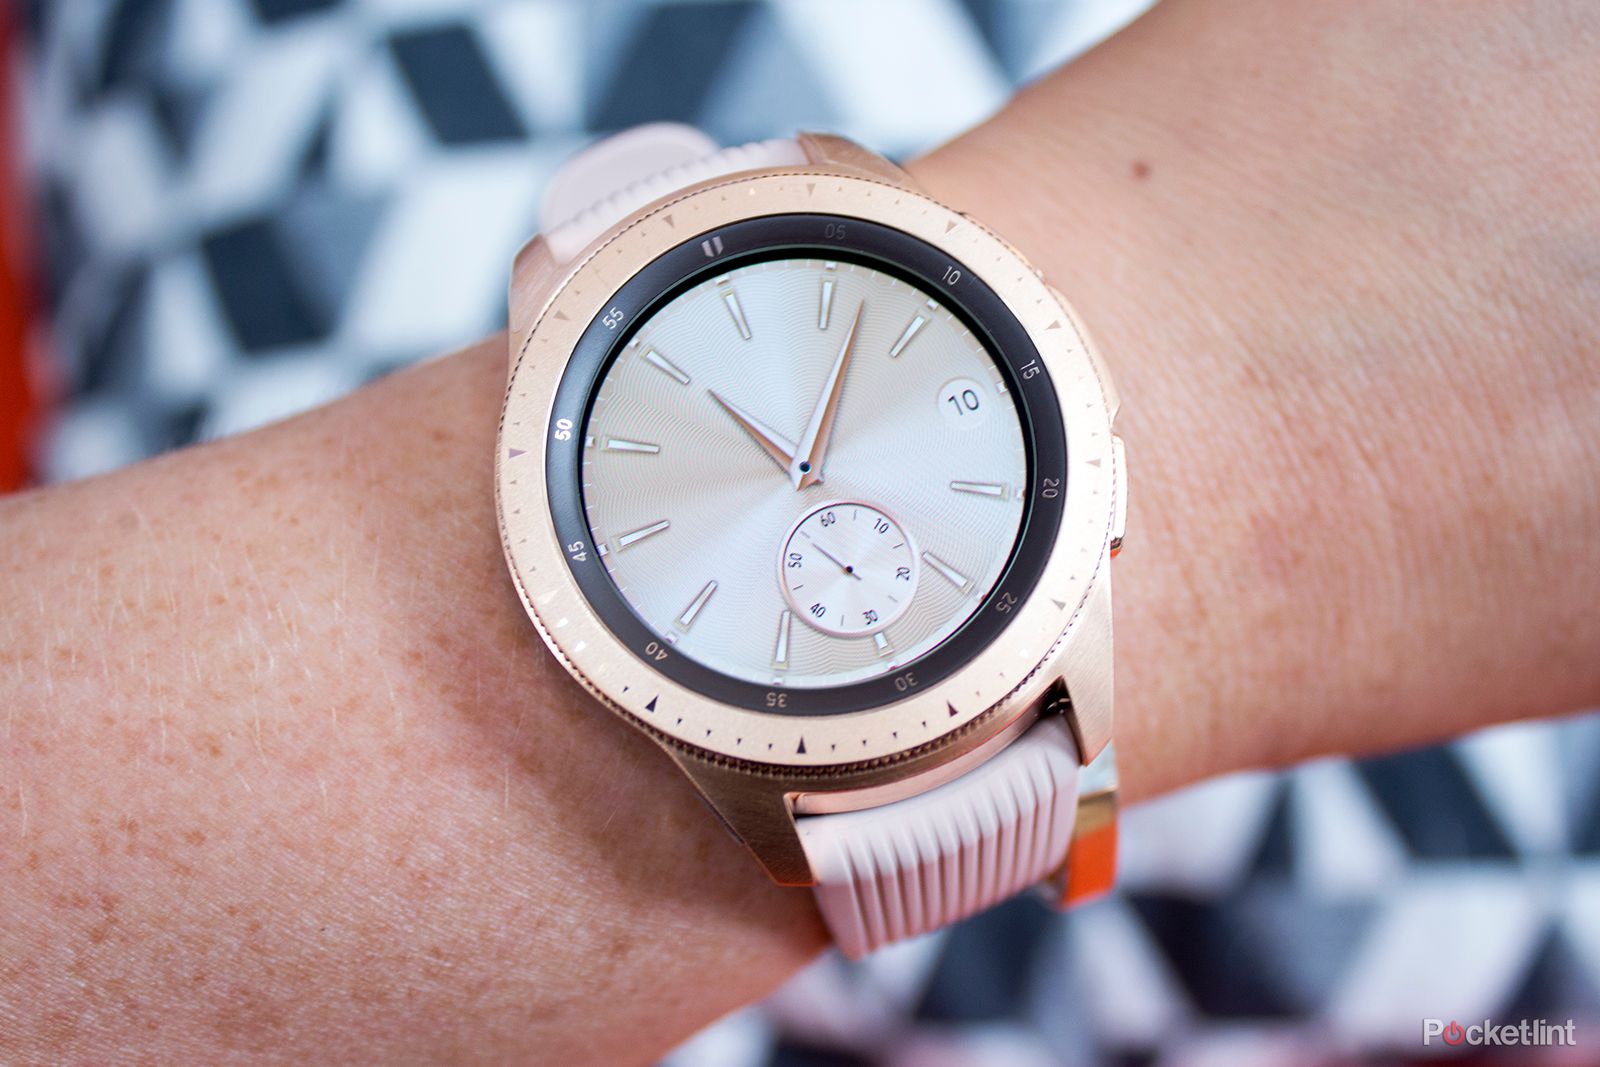 Samsungs next smartwatch could be a hybrid image 1